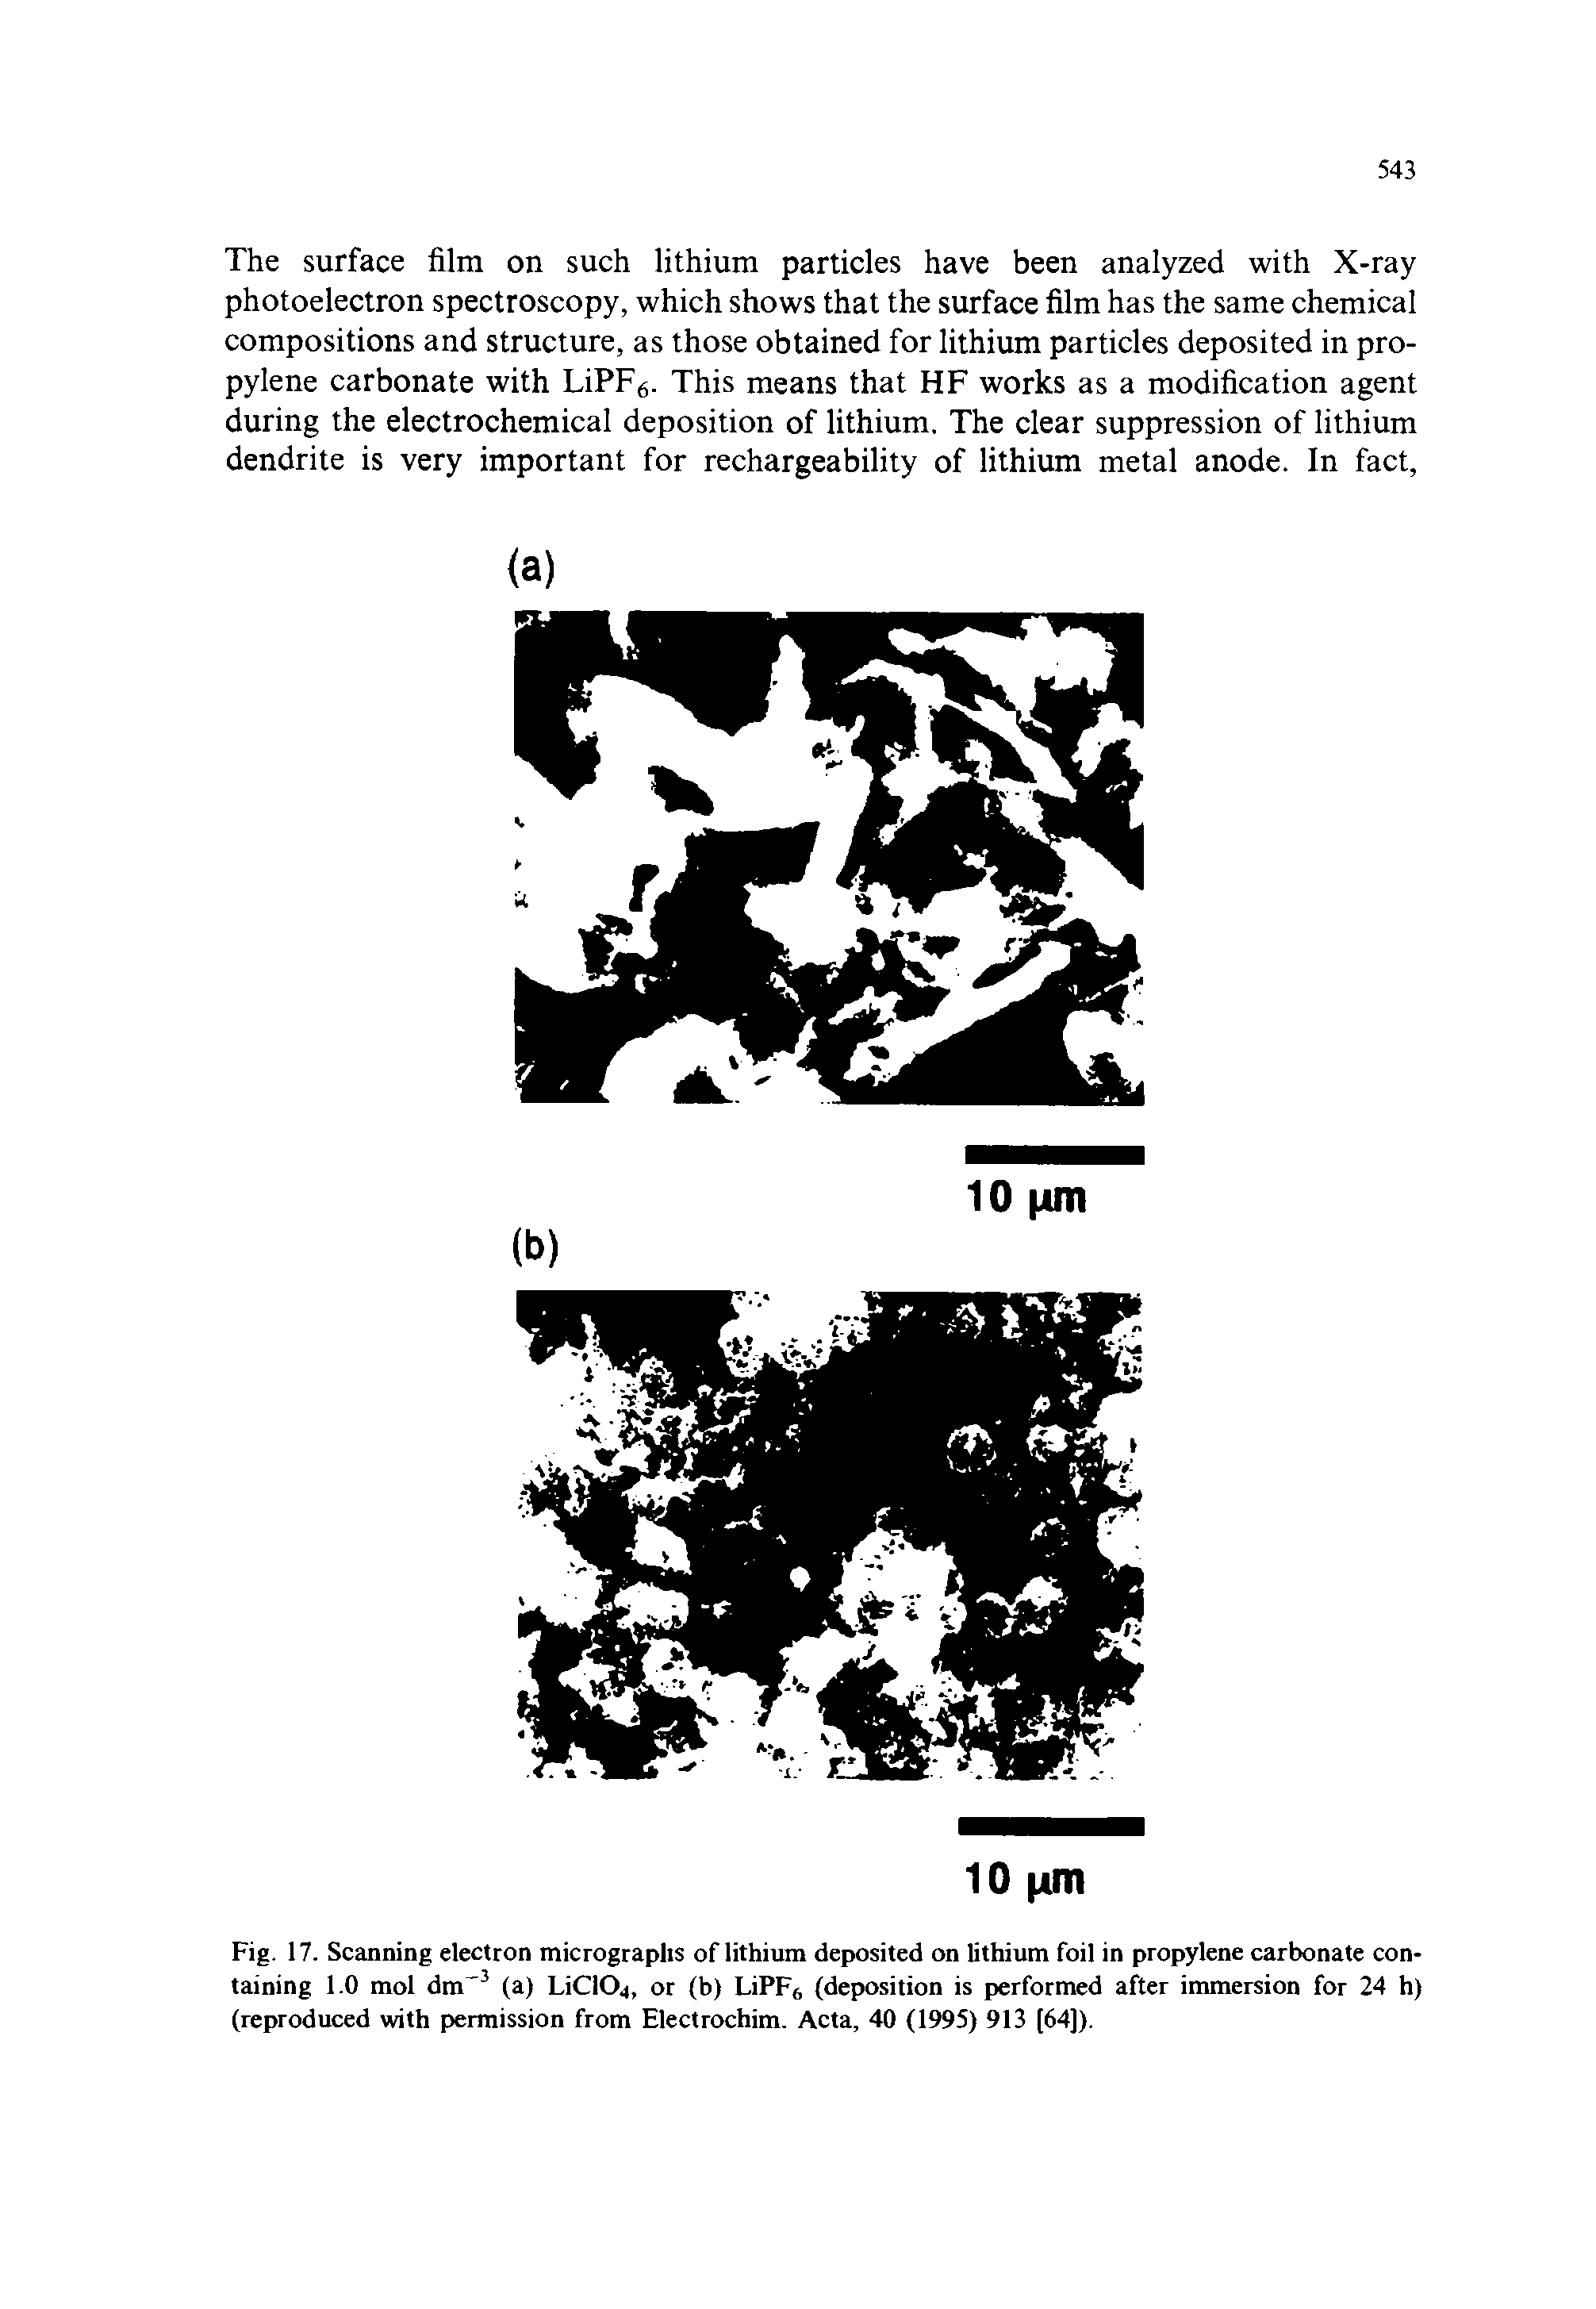 Fig. 17. Scanning electron micrographs of lithium deposited on lithium foil in propylene carbonate containing 1.0 mol dm-3 (a) LiCKX, or (b) LiPF6 (deposition is performed after immersion for 24 h) (reproduced with permission from Electrochim. Acta, 40 (1995) 913 [64]).